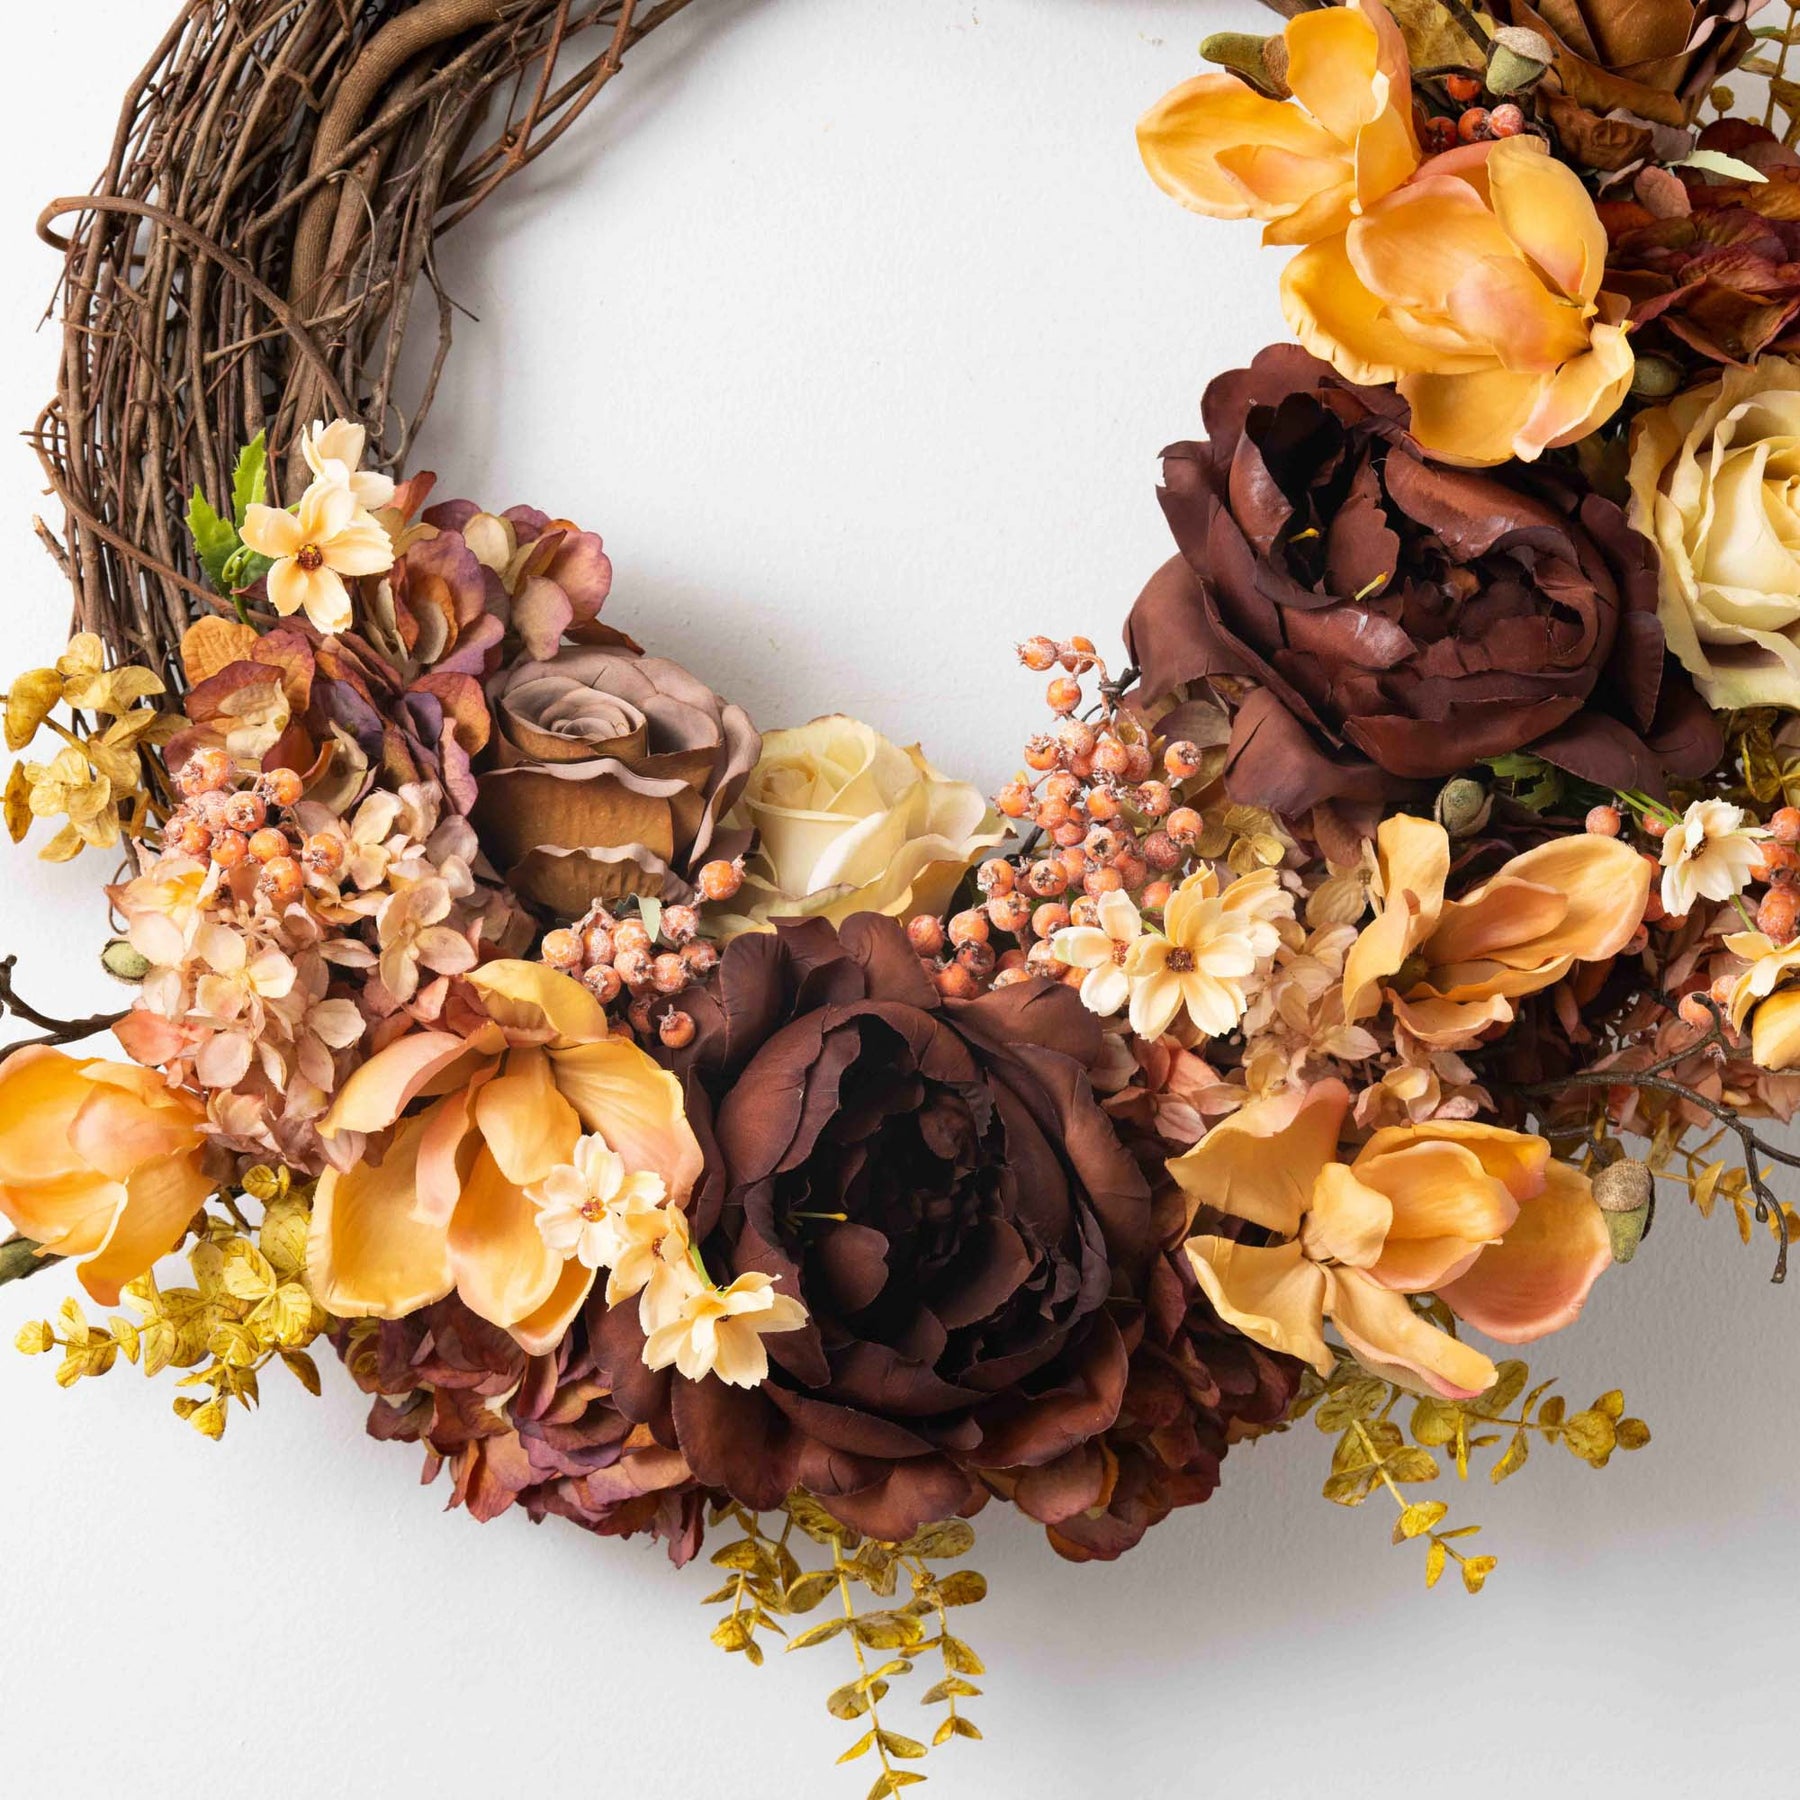 Fall Peony and Pumpkin Wreath, Autumn Year Round Wreaths for Front Door,  Artificial Autumn Front Door Wreath Christmas Thanksgiving Wreath for Home  Farmhouse Decor and Festival Celebration 